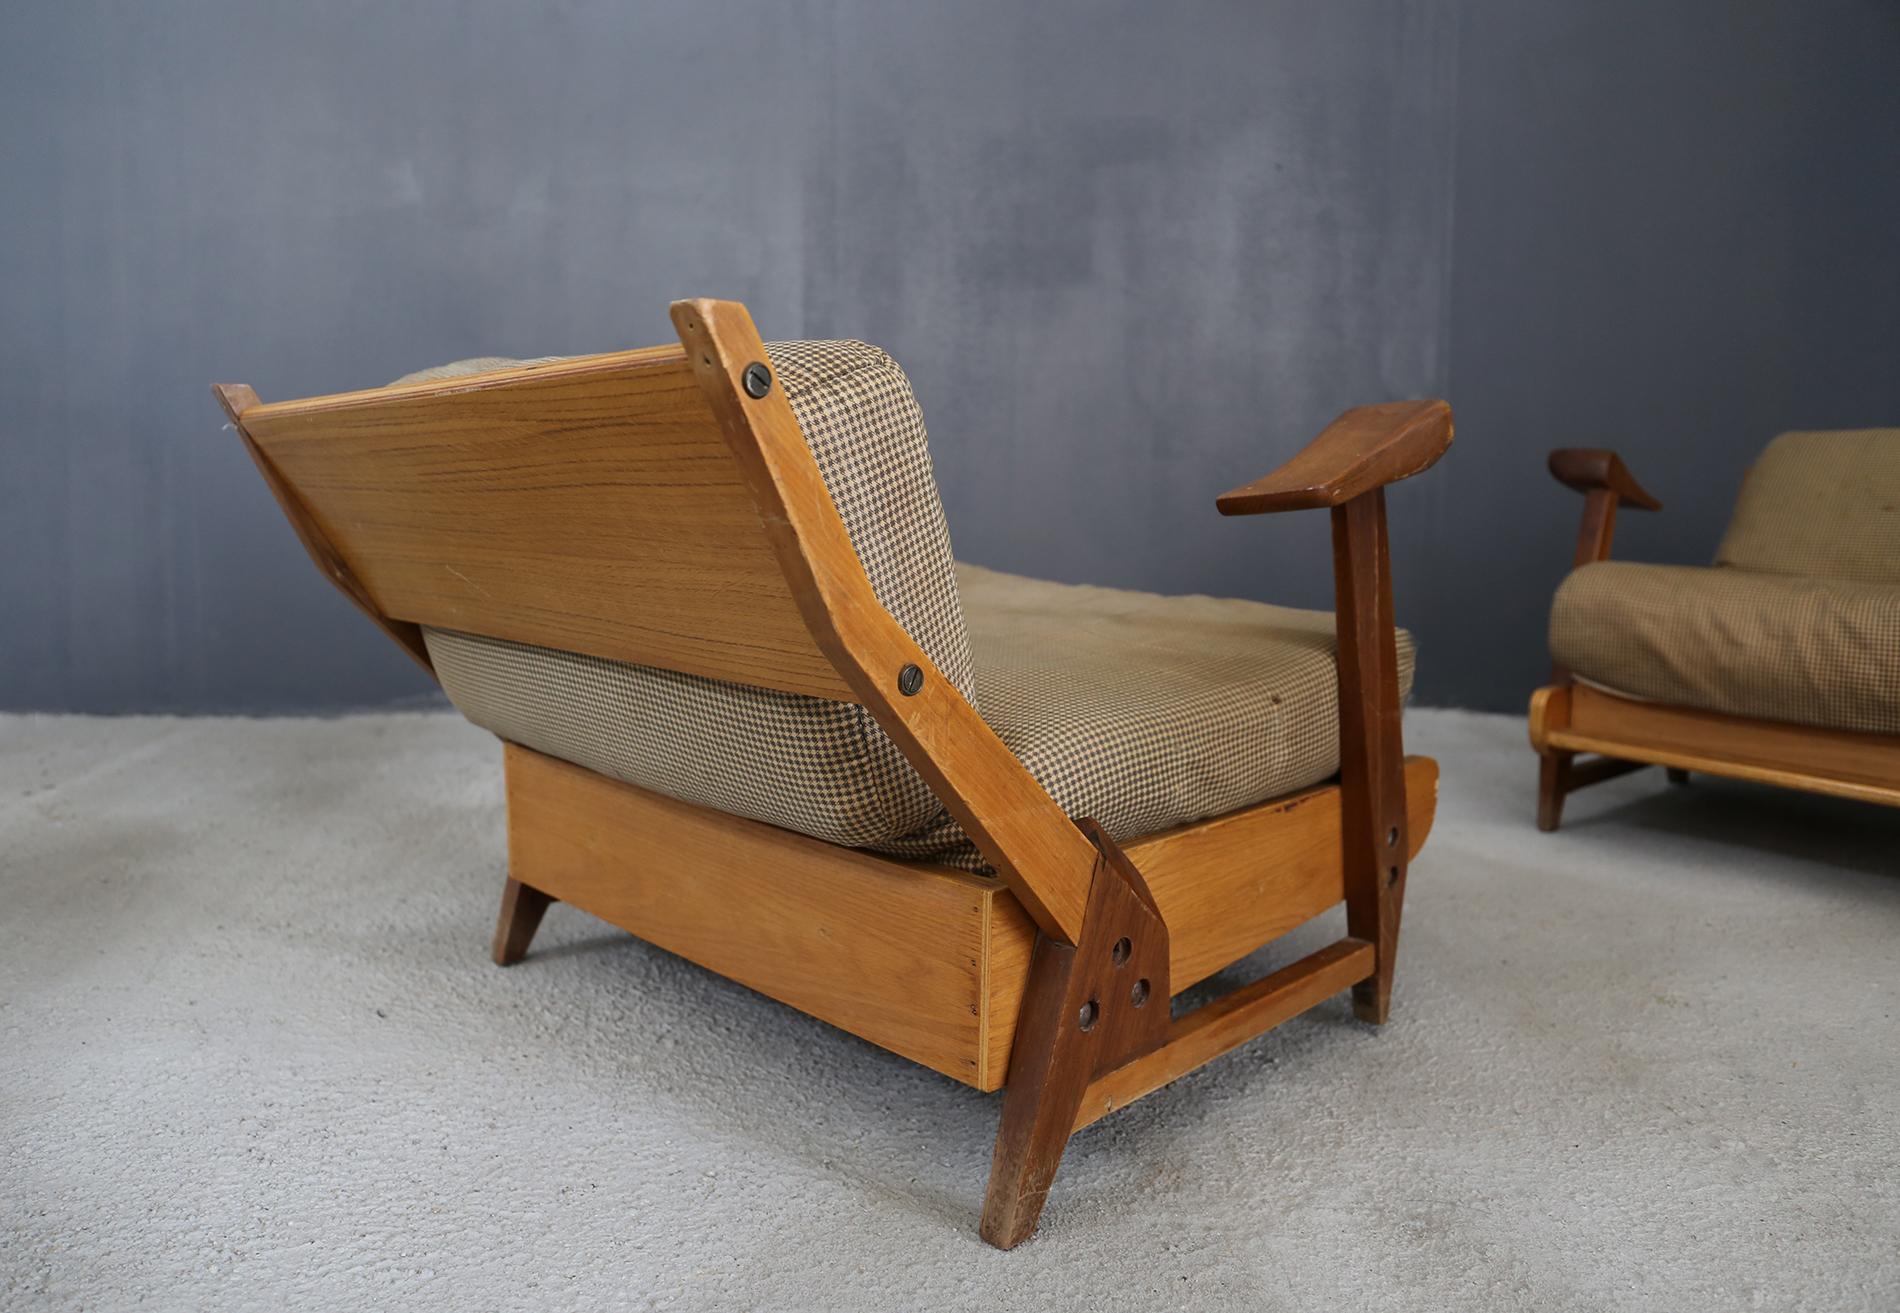 Pair of armchairs to Guillerme et Chambron from 1950. The chairs are a beautiful reused of France design. In excellent vintage condition. Original fabric of the time. Teak and mahogany wood
The peculiarity of these armchairs is their very